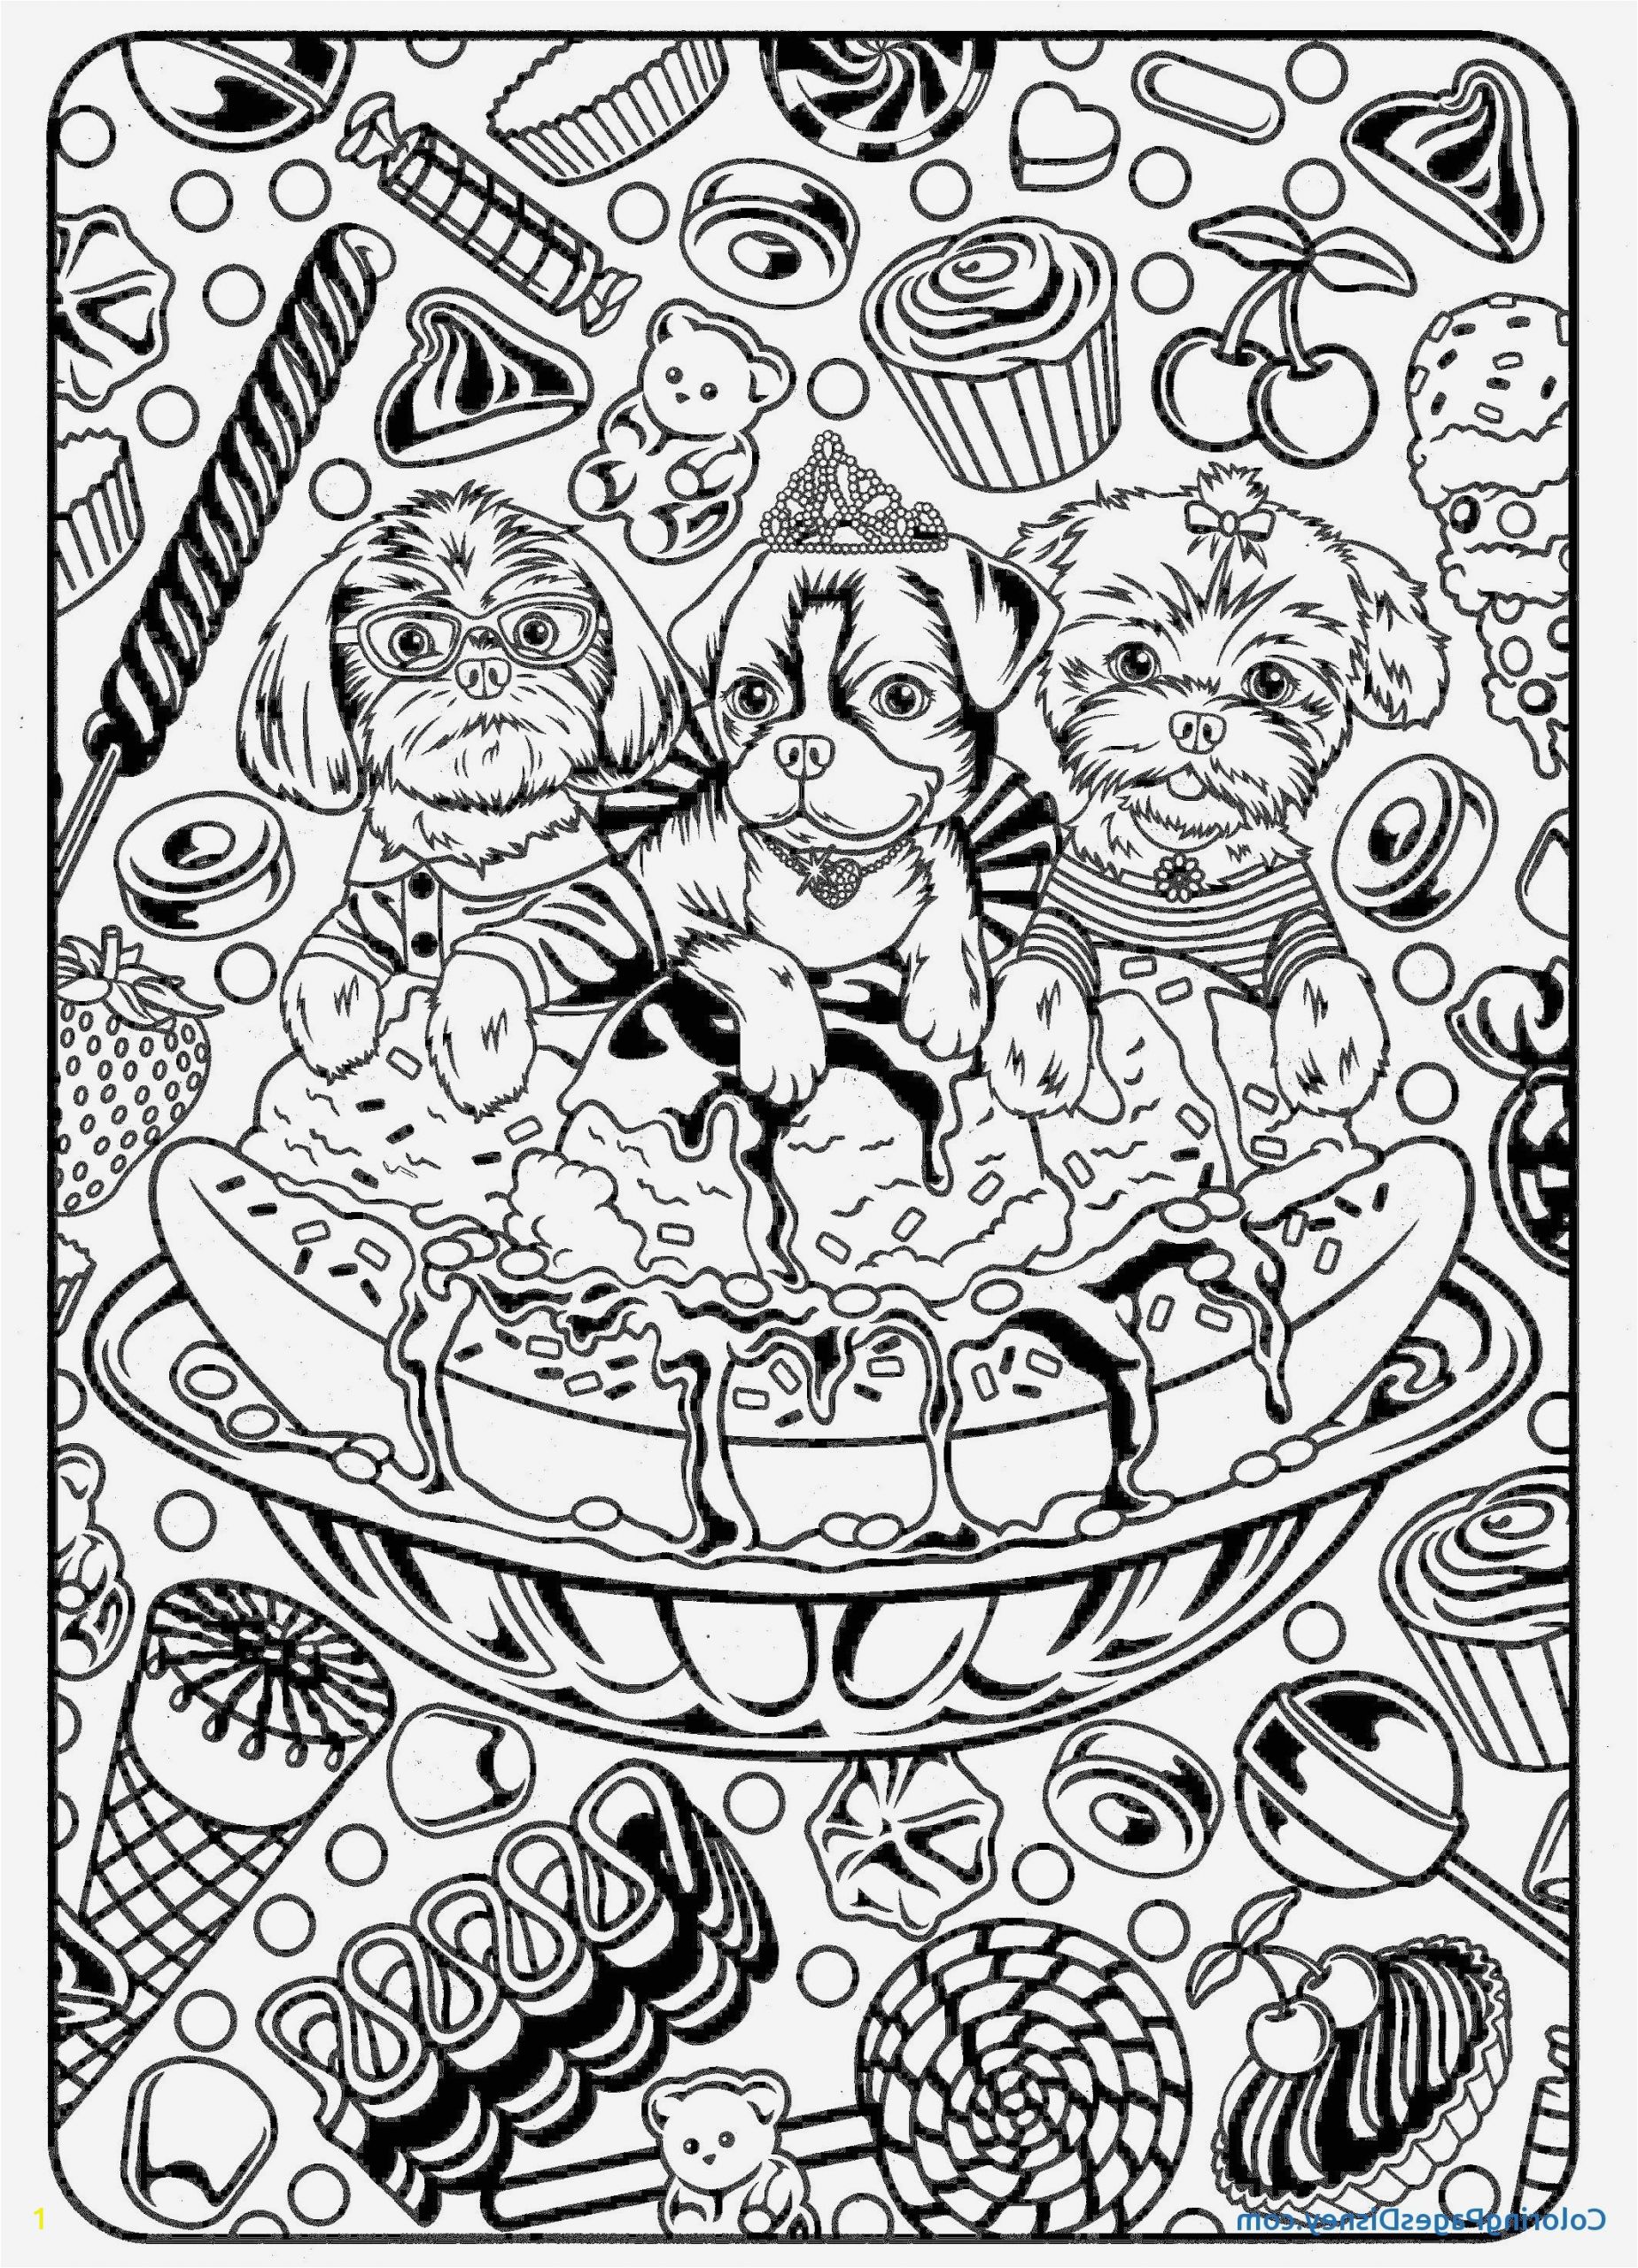 rangoli coloring page new image best little shop horrors coloring pages nicho of rangoli coloring page